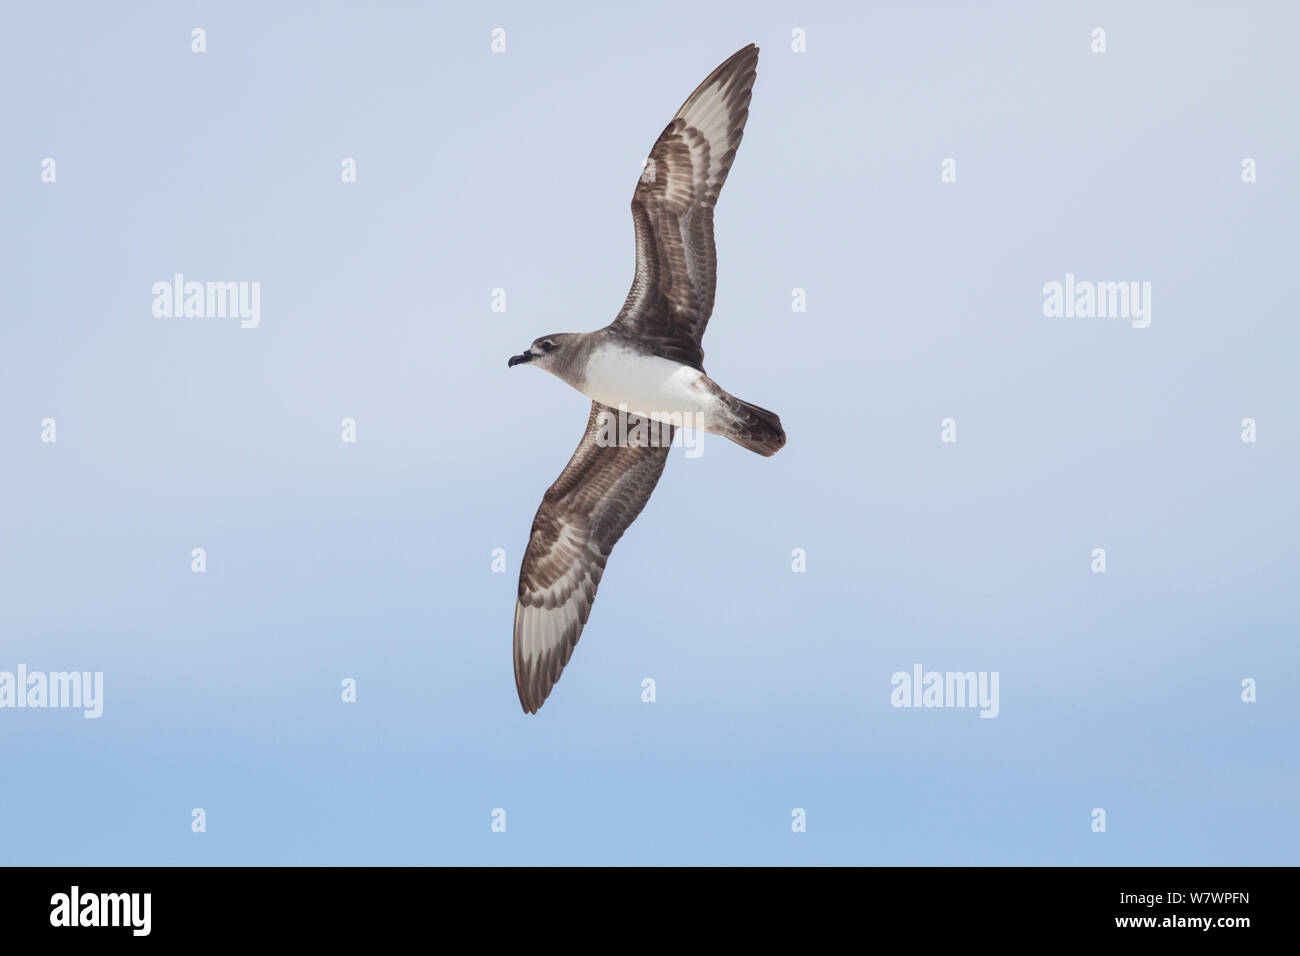 Intermediate morph adult Kermadec petrel (Pterodroma neglecta) flying against a blue sky, showing the underwing pattern. Ducie Island, Pitcairn Islands, South Pacific. November. Stock Photo